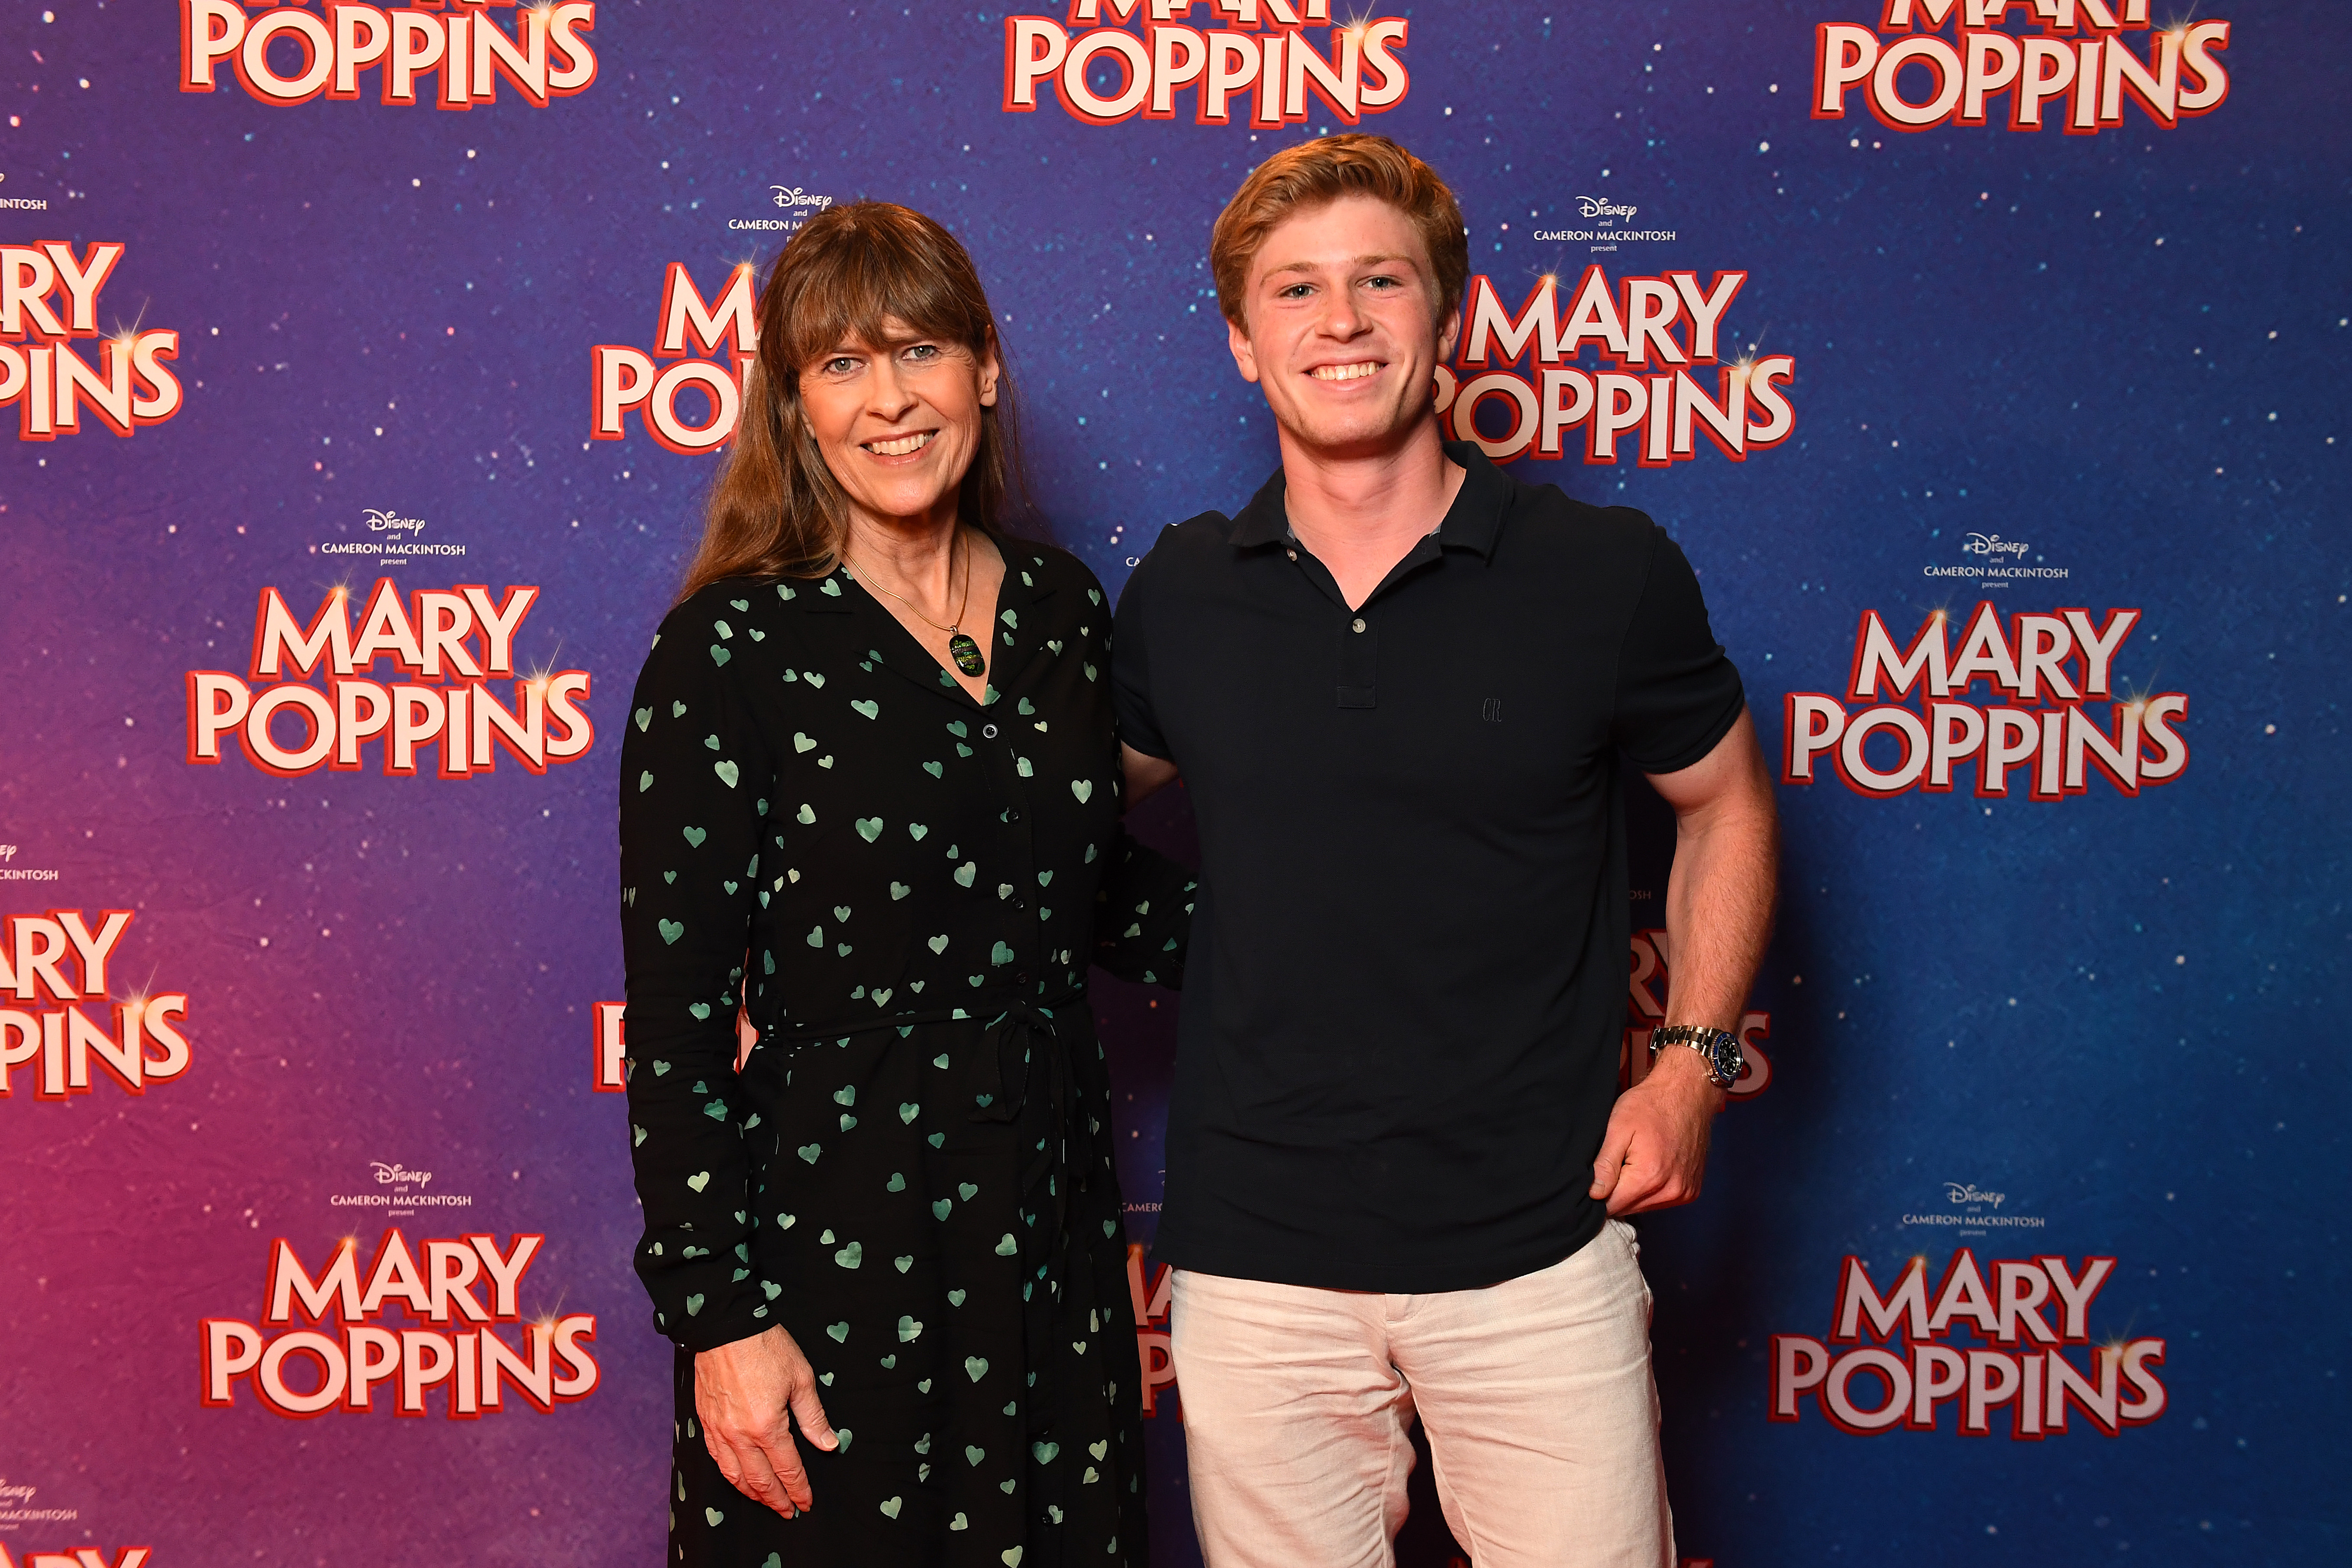 Terri and Robert Irwin at the  the opening night of Mary Poppins at the Lyric Theatre at QPAC in Brisbane, Australia in 2022 | Source: Getty Images